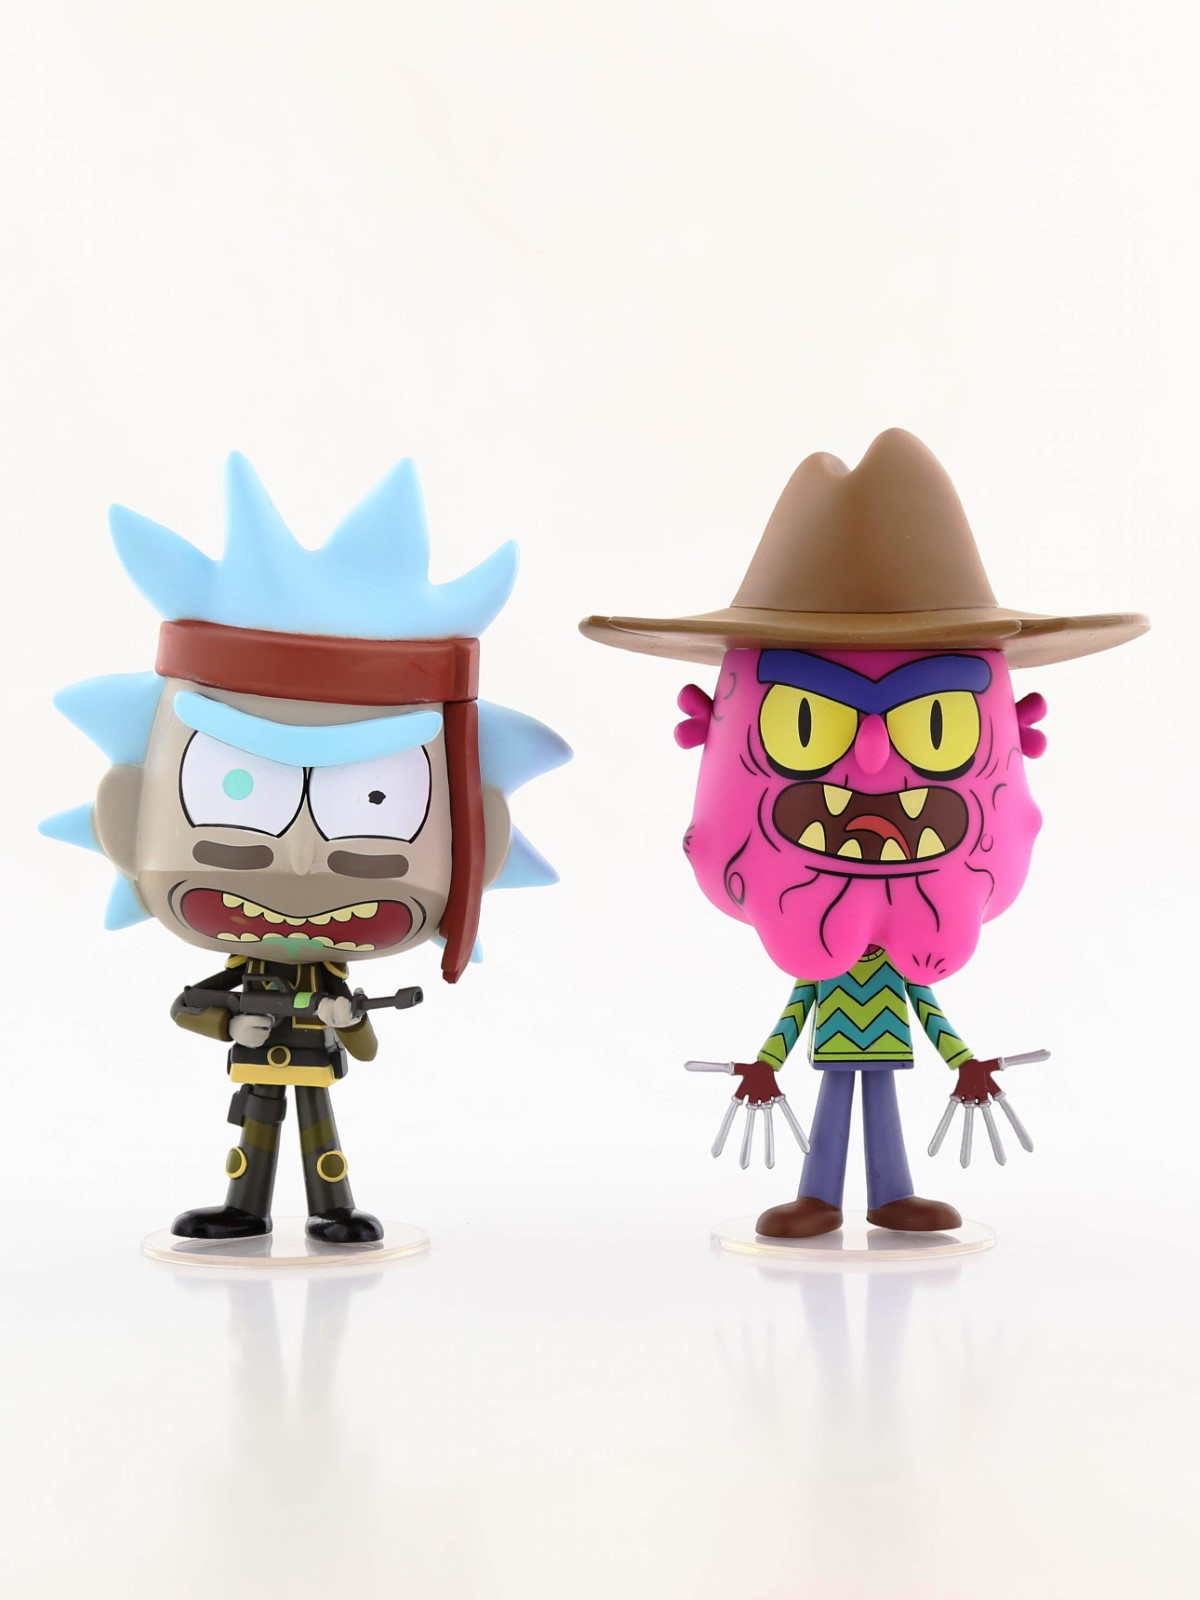 Funko Pop Rick & Morty Seal Rick & Scary Terry Vinyl Figures (2 Pack)